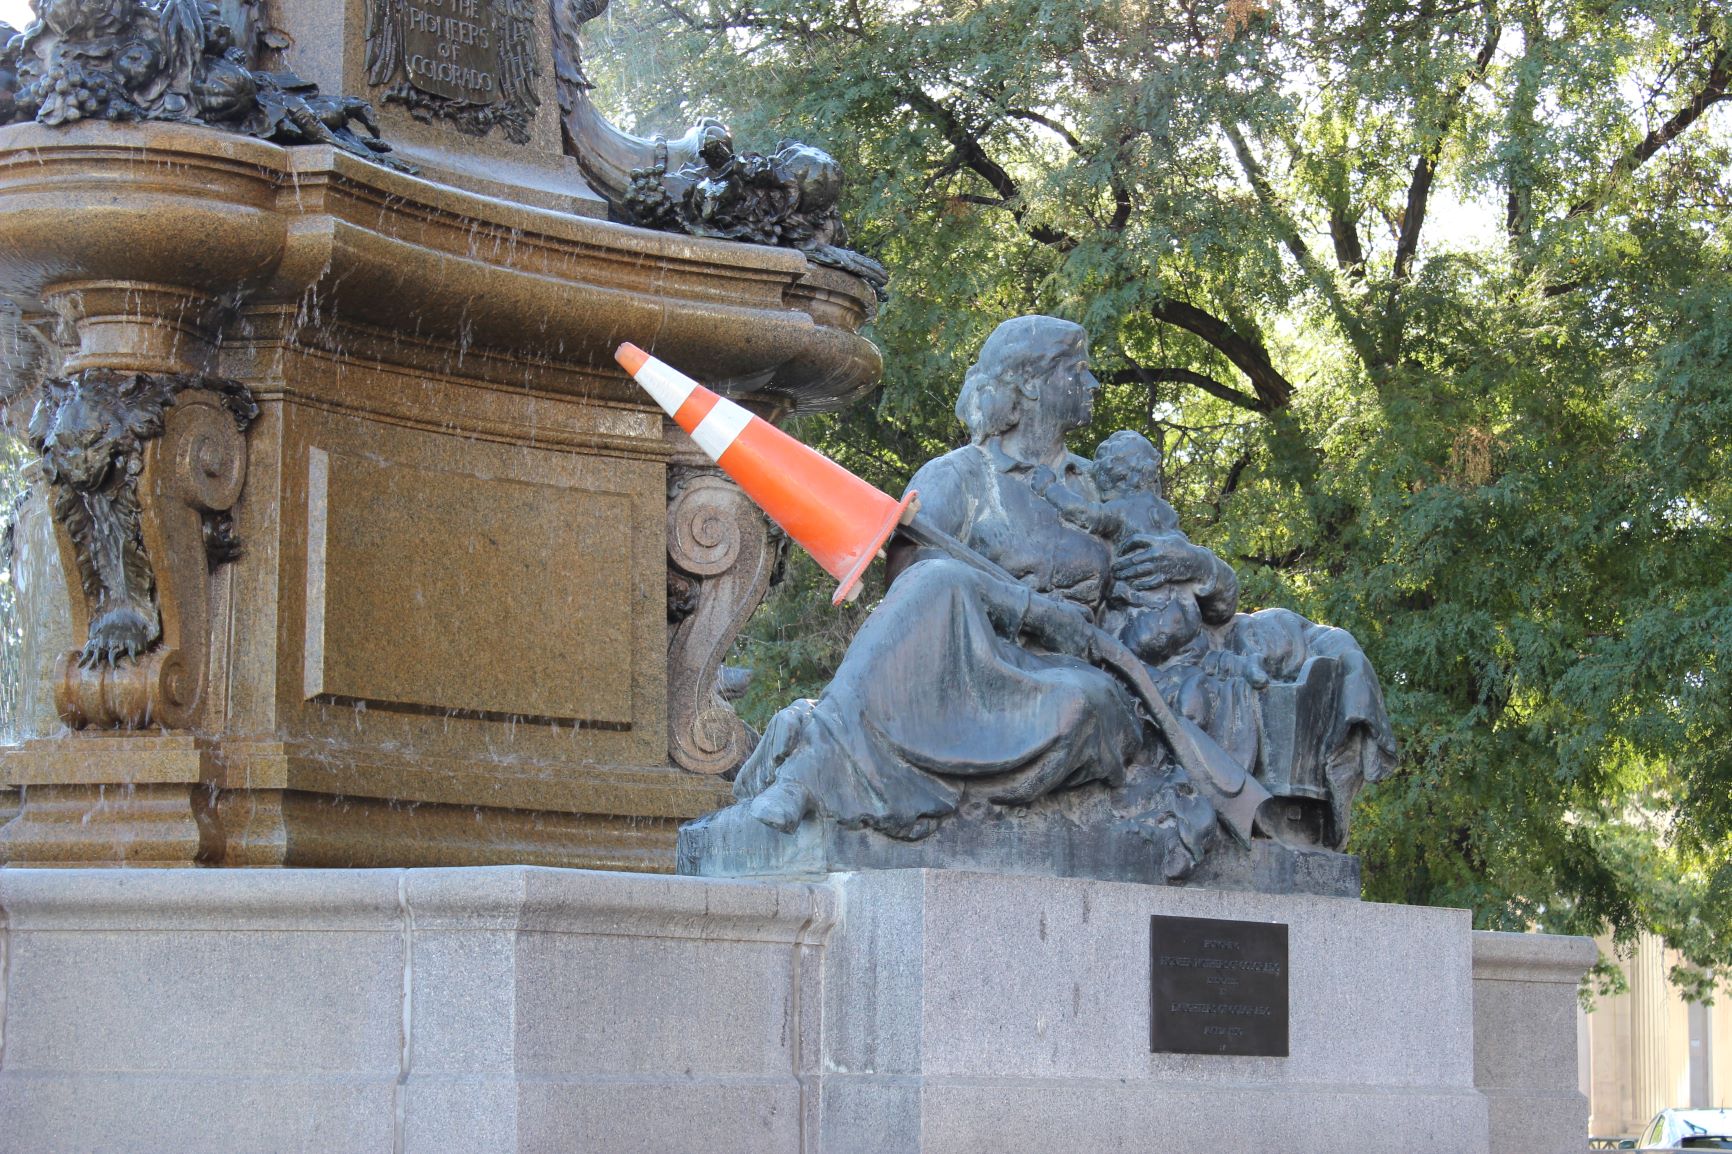 In September 2019, a protester covered the pioneer mother's rifle with an orange traffic cone.